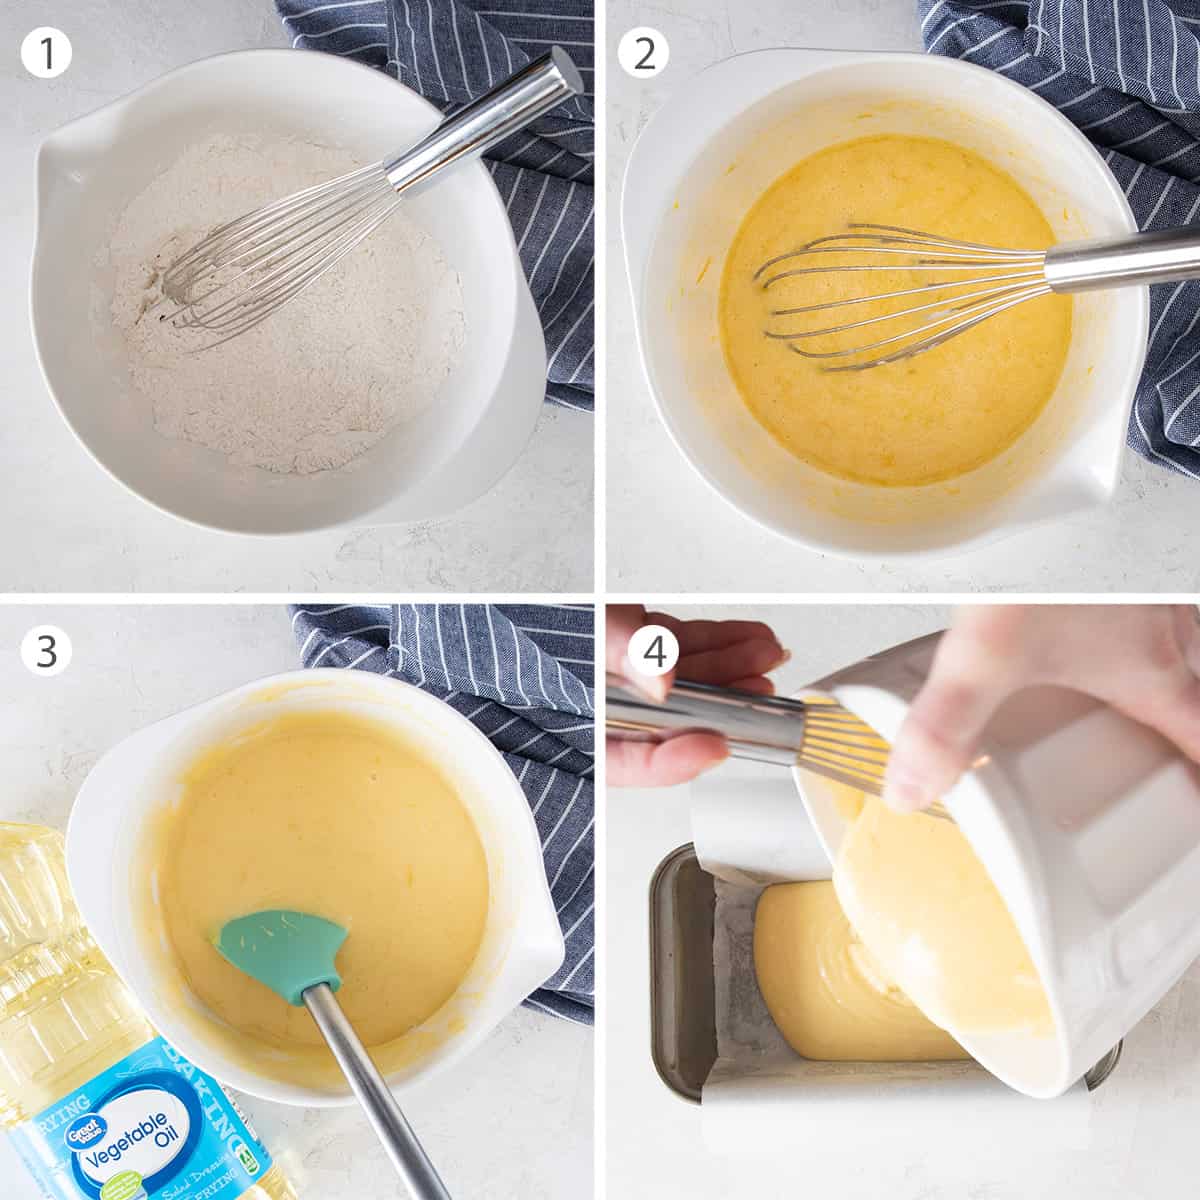 Collage of steps to make lemon cake including dry ingredients, mixing the wet and folding in oil, and pouring the cake batter into a pan.